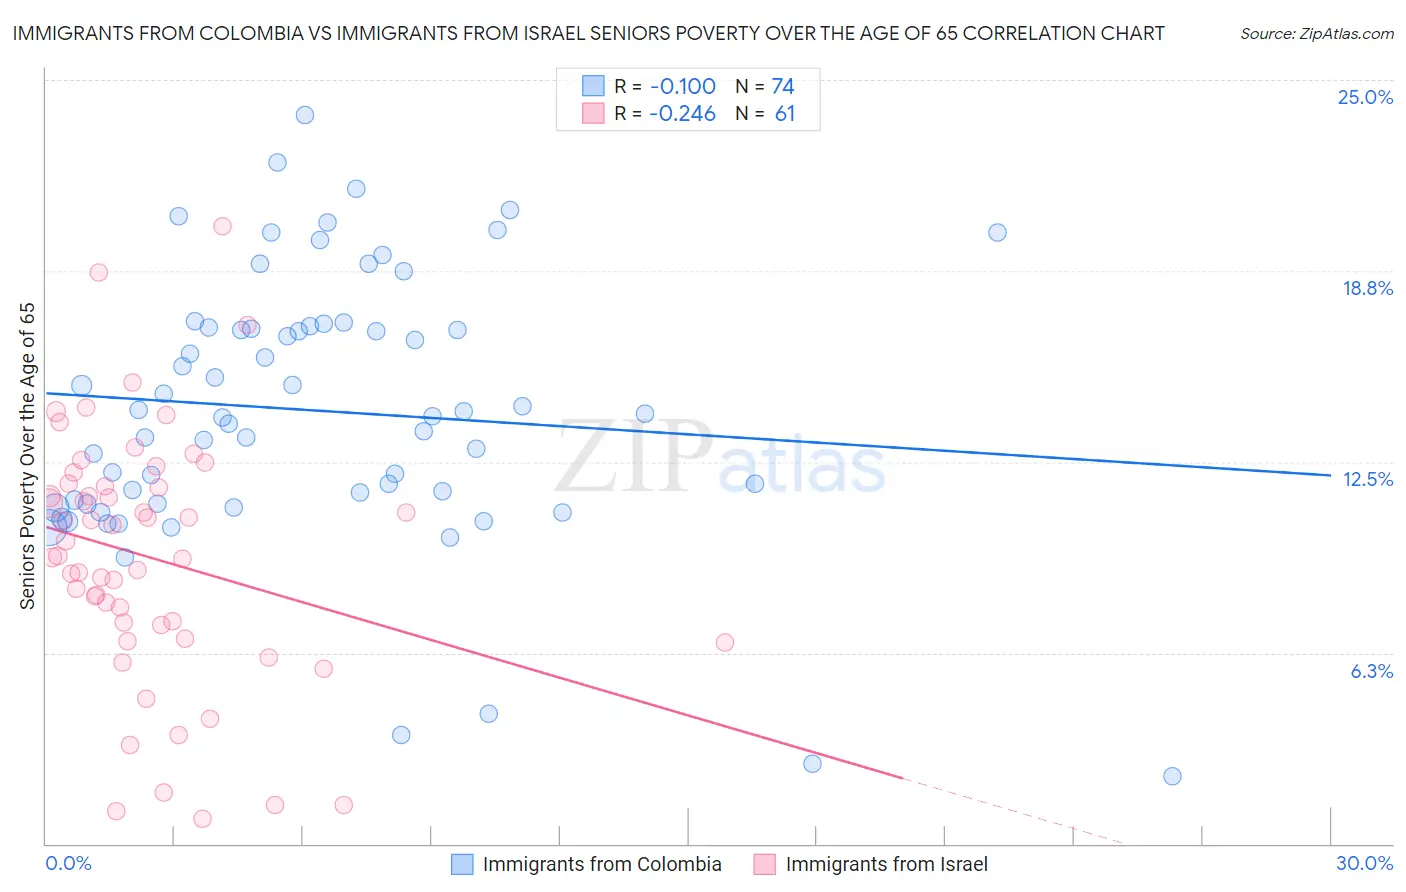 Immigrants from Colombia vs Immigrants from Israel Seniors Poverty Over the Age of 65